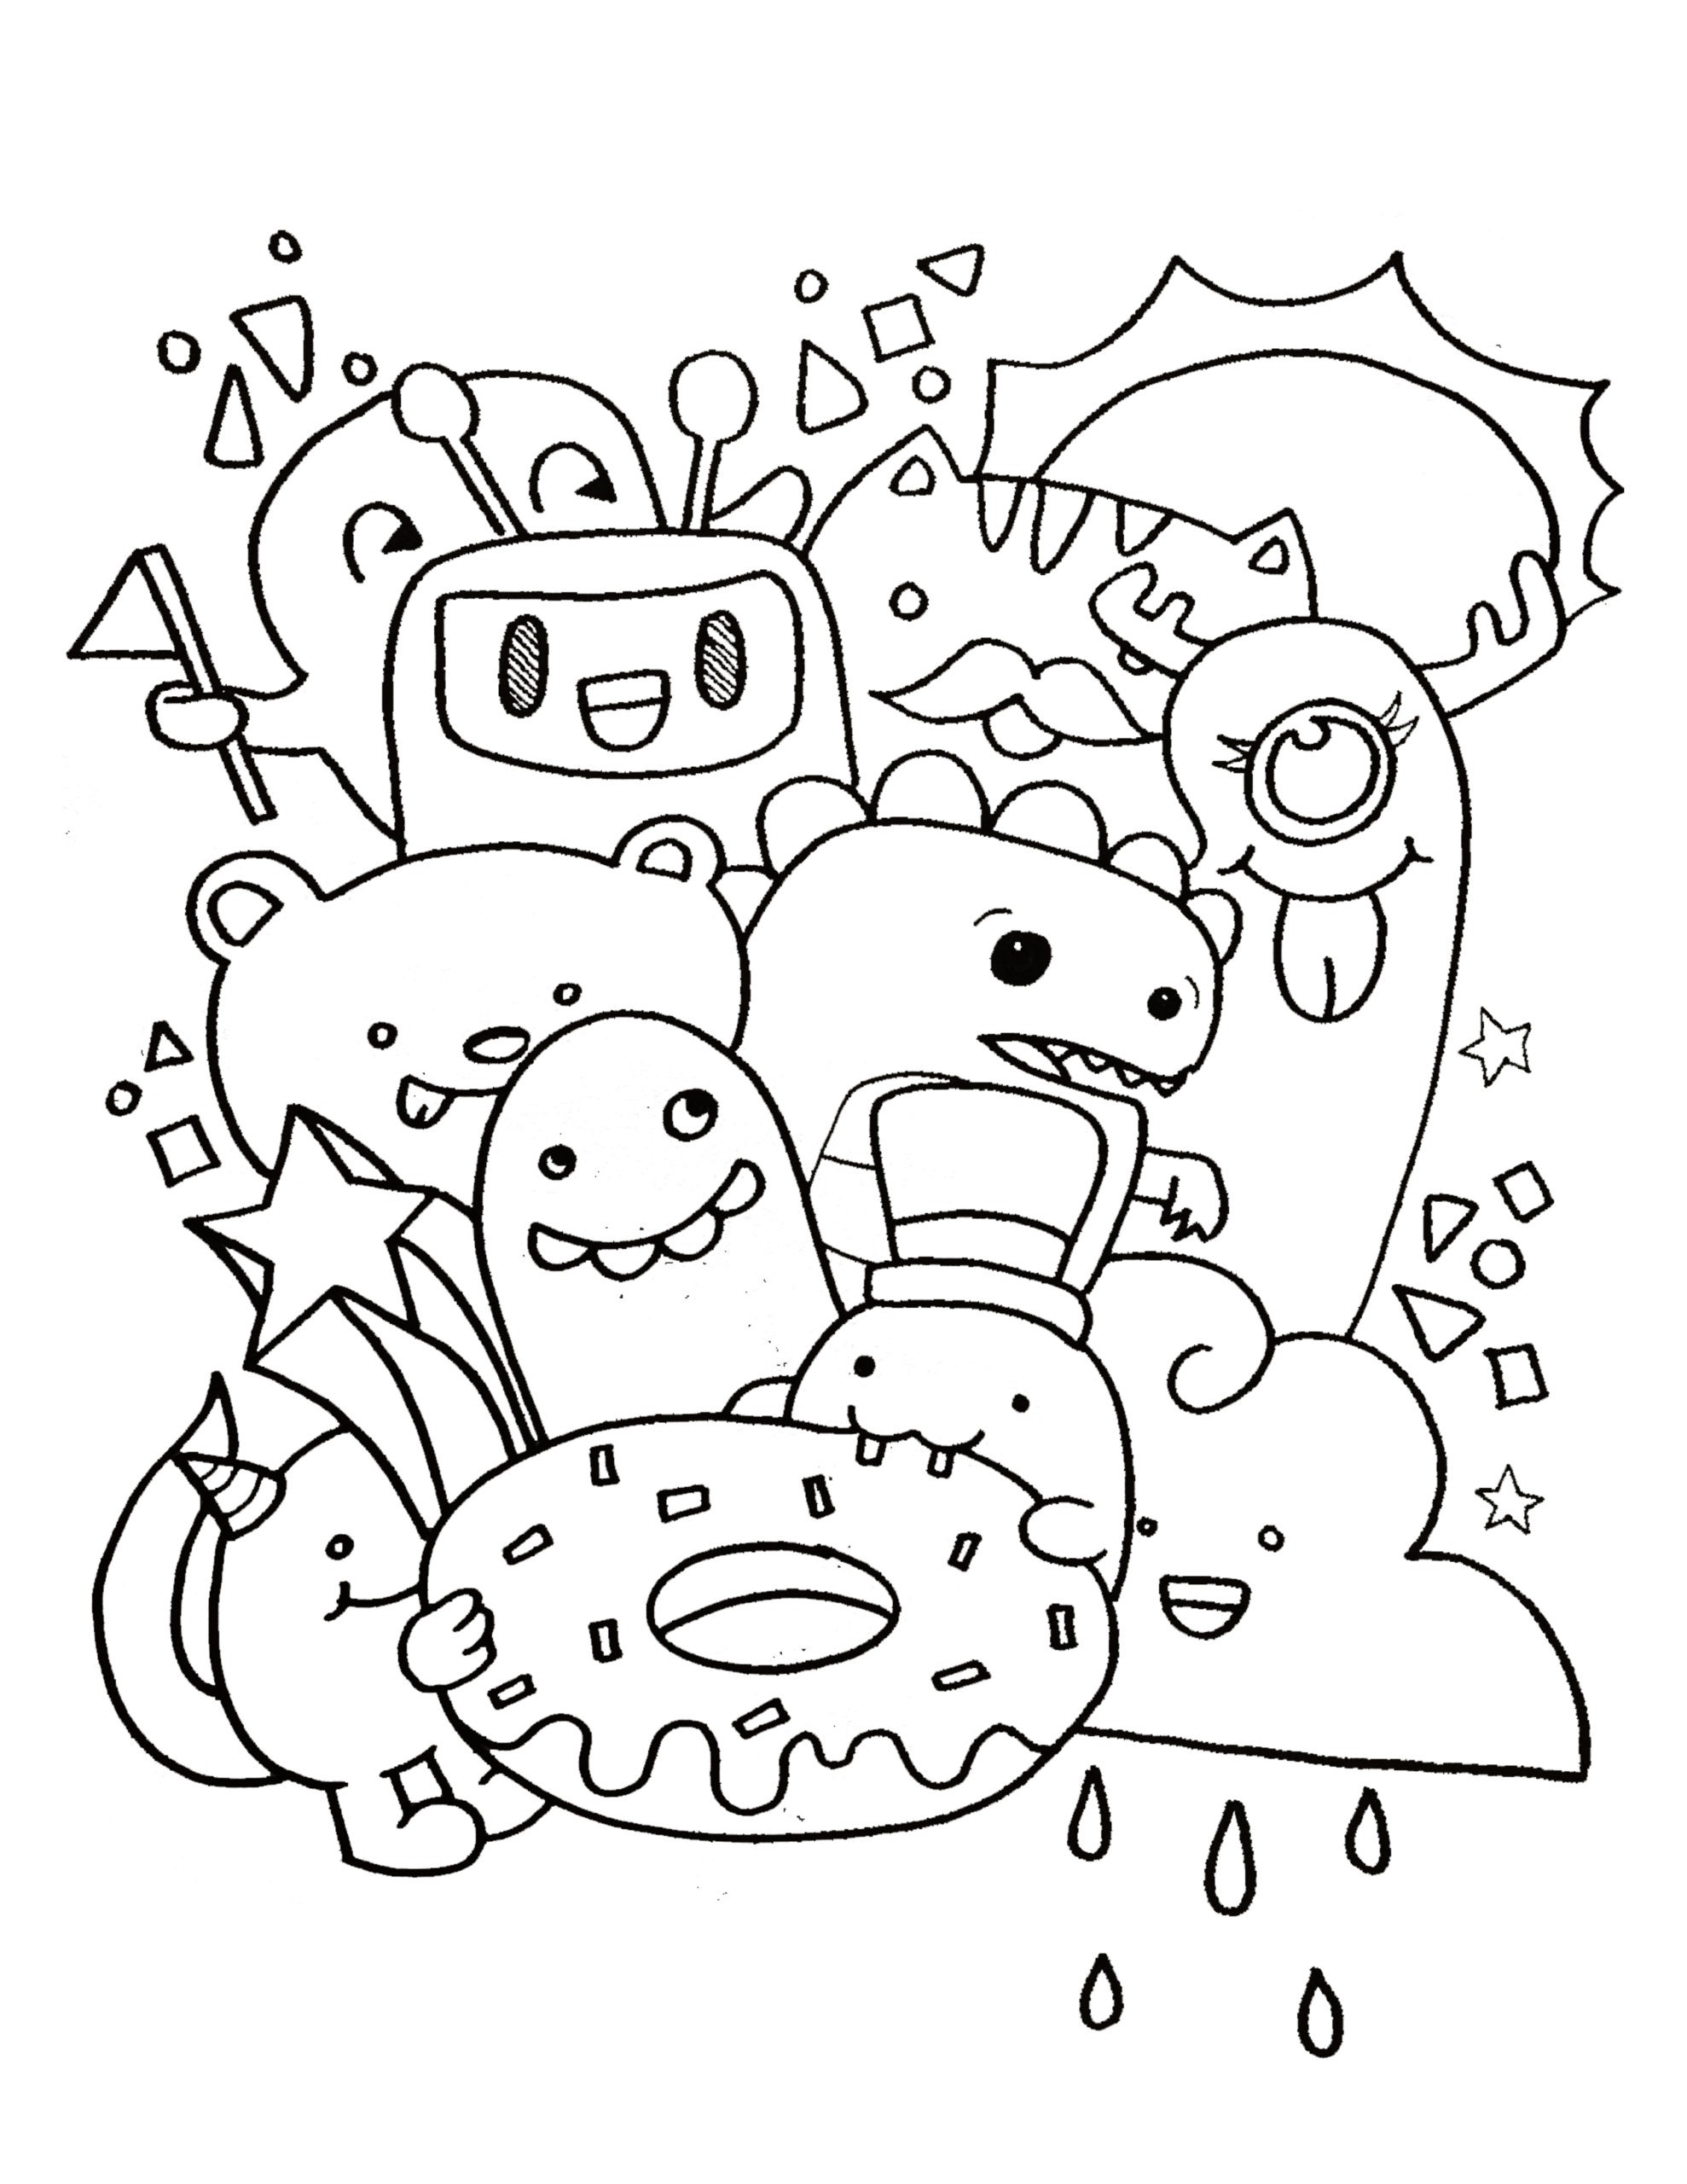 Free Downloadable Colouring Pages For Kids Colouring In Pages For Kids ...